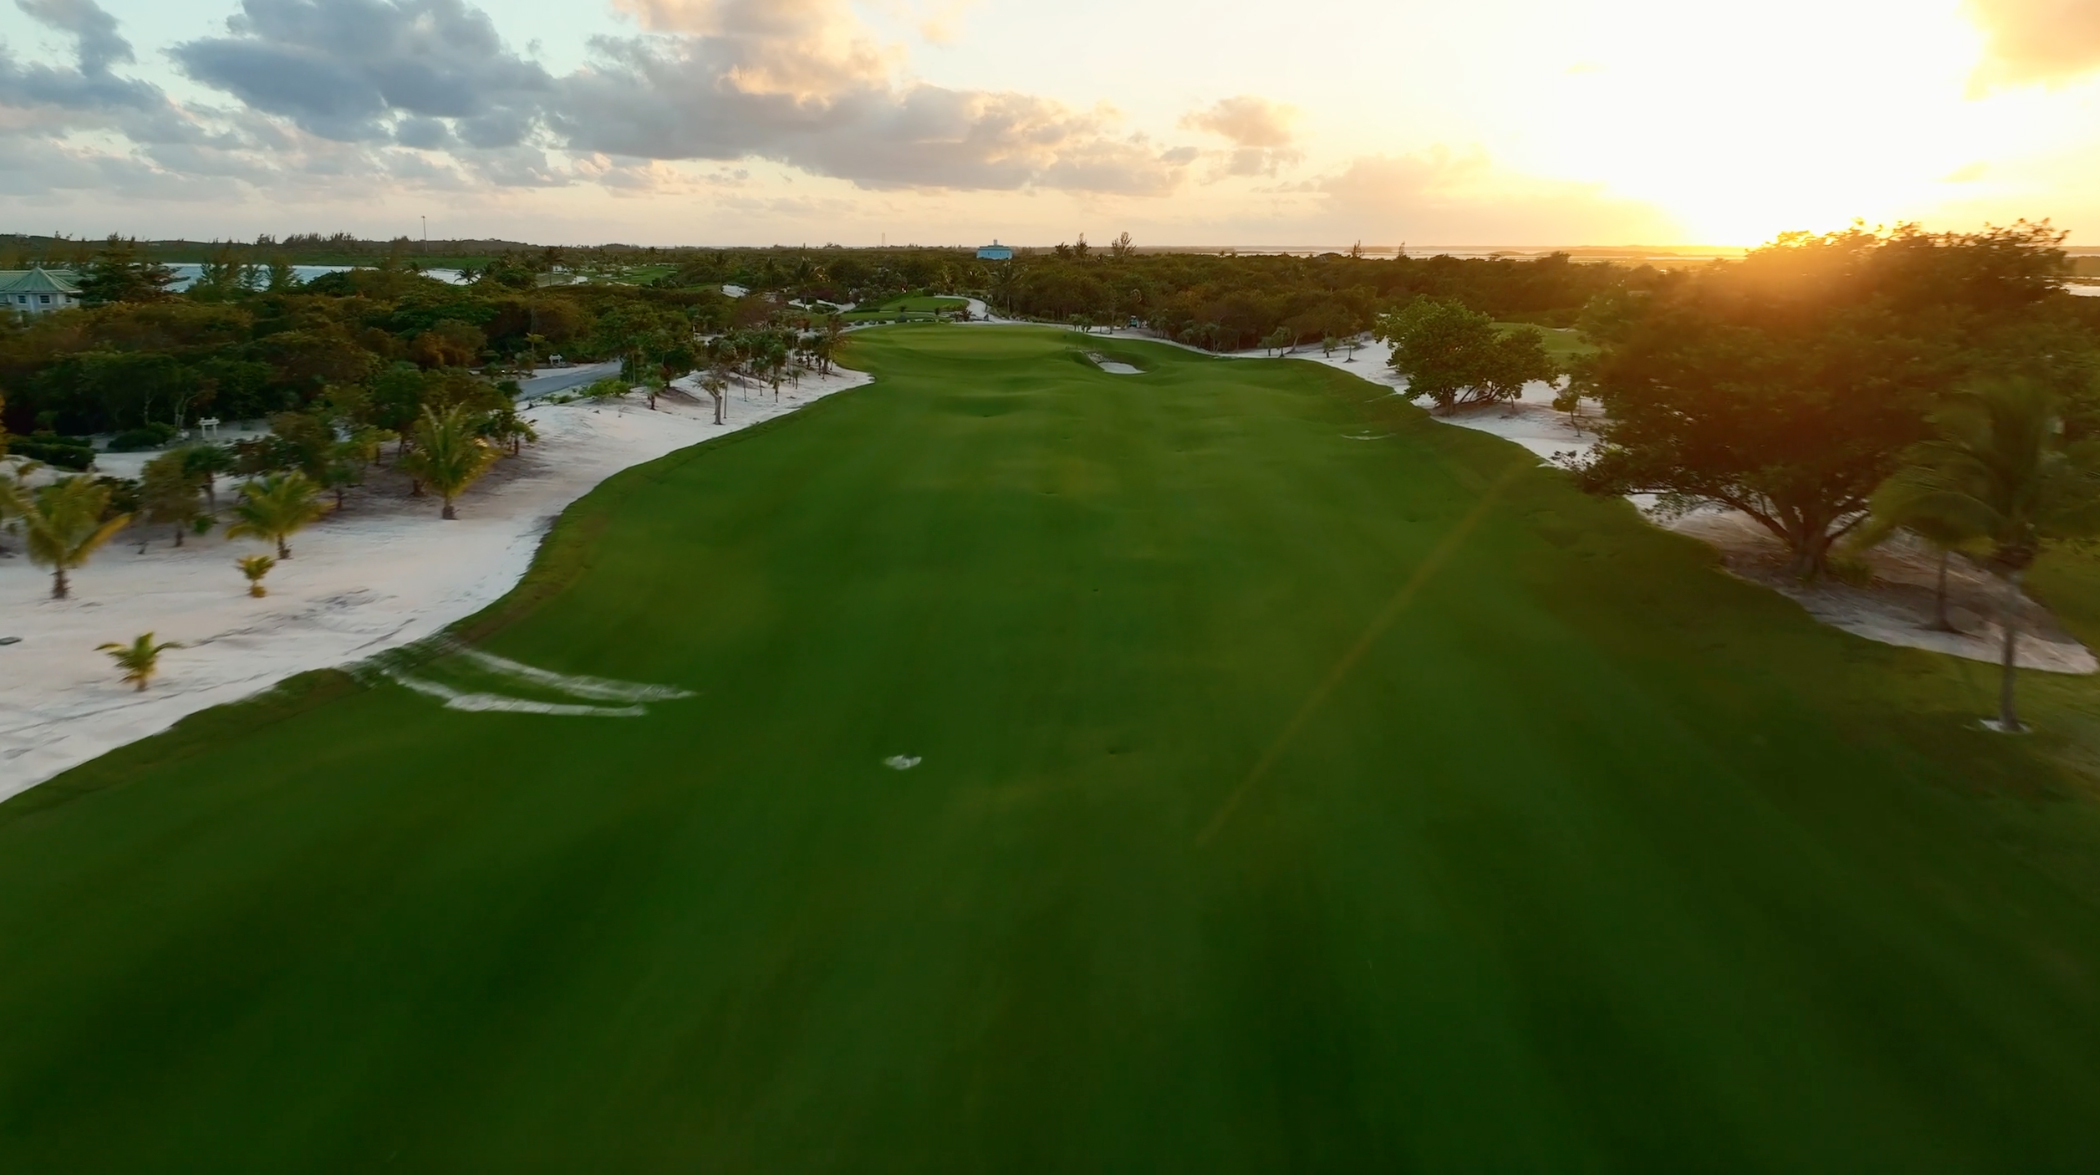 Aerial shot of Hole 3 from The Abaco Club golf course